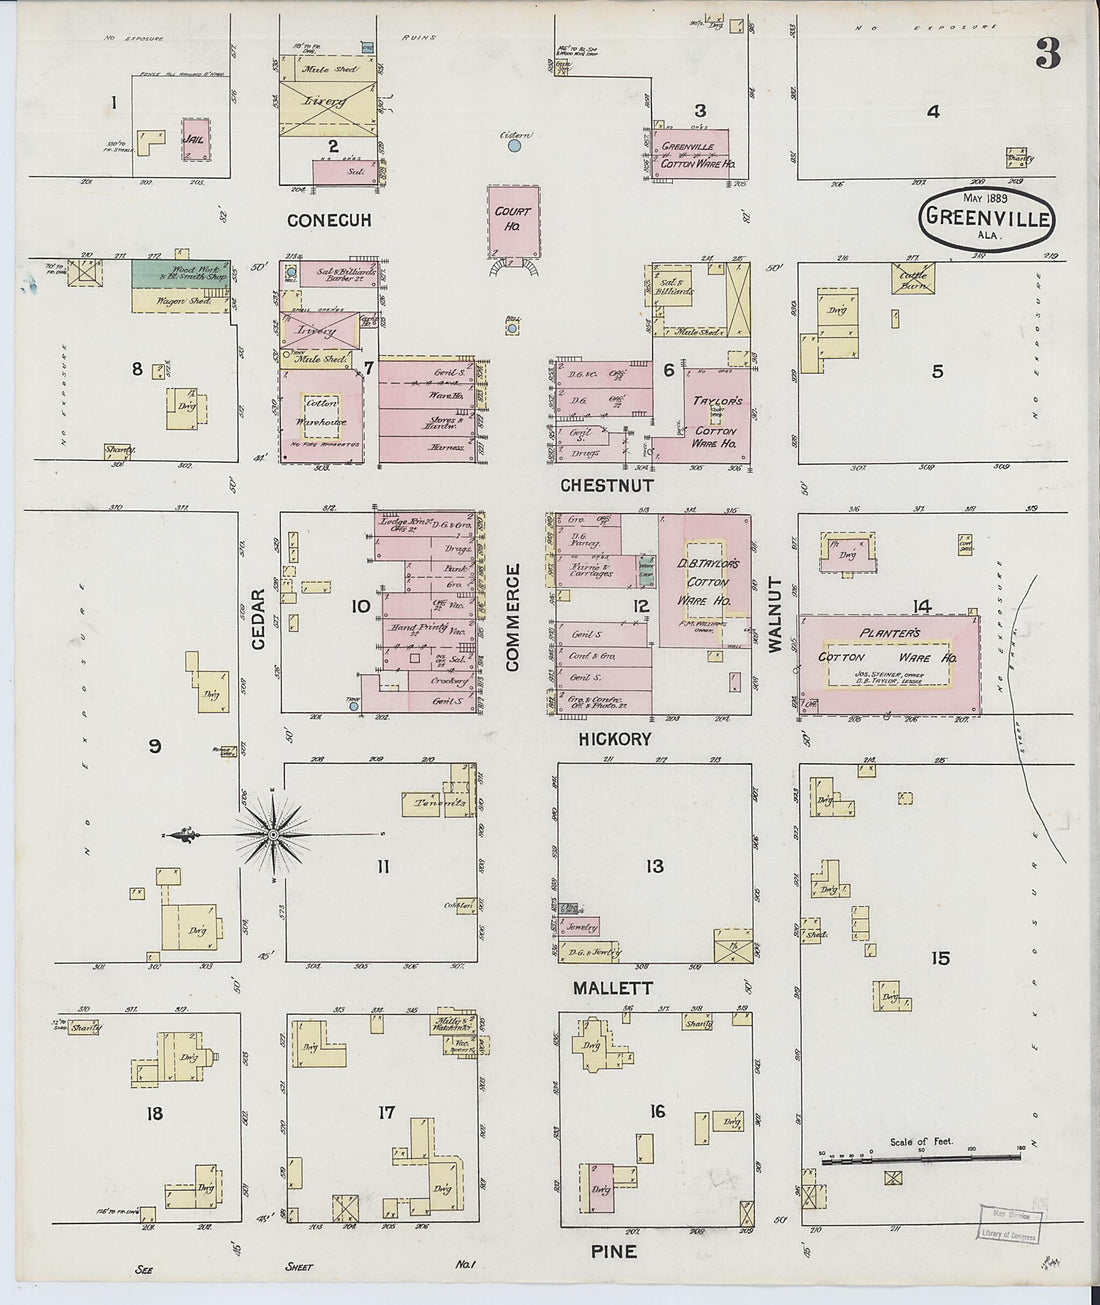 This old map of Greenville, Butler County, Alabama was created by Sanborn Map Company in 1889